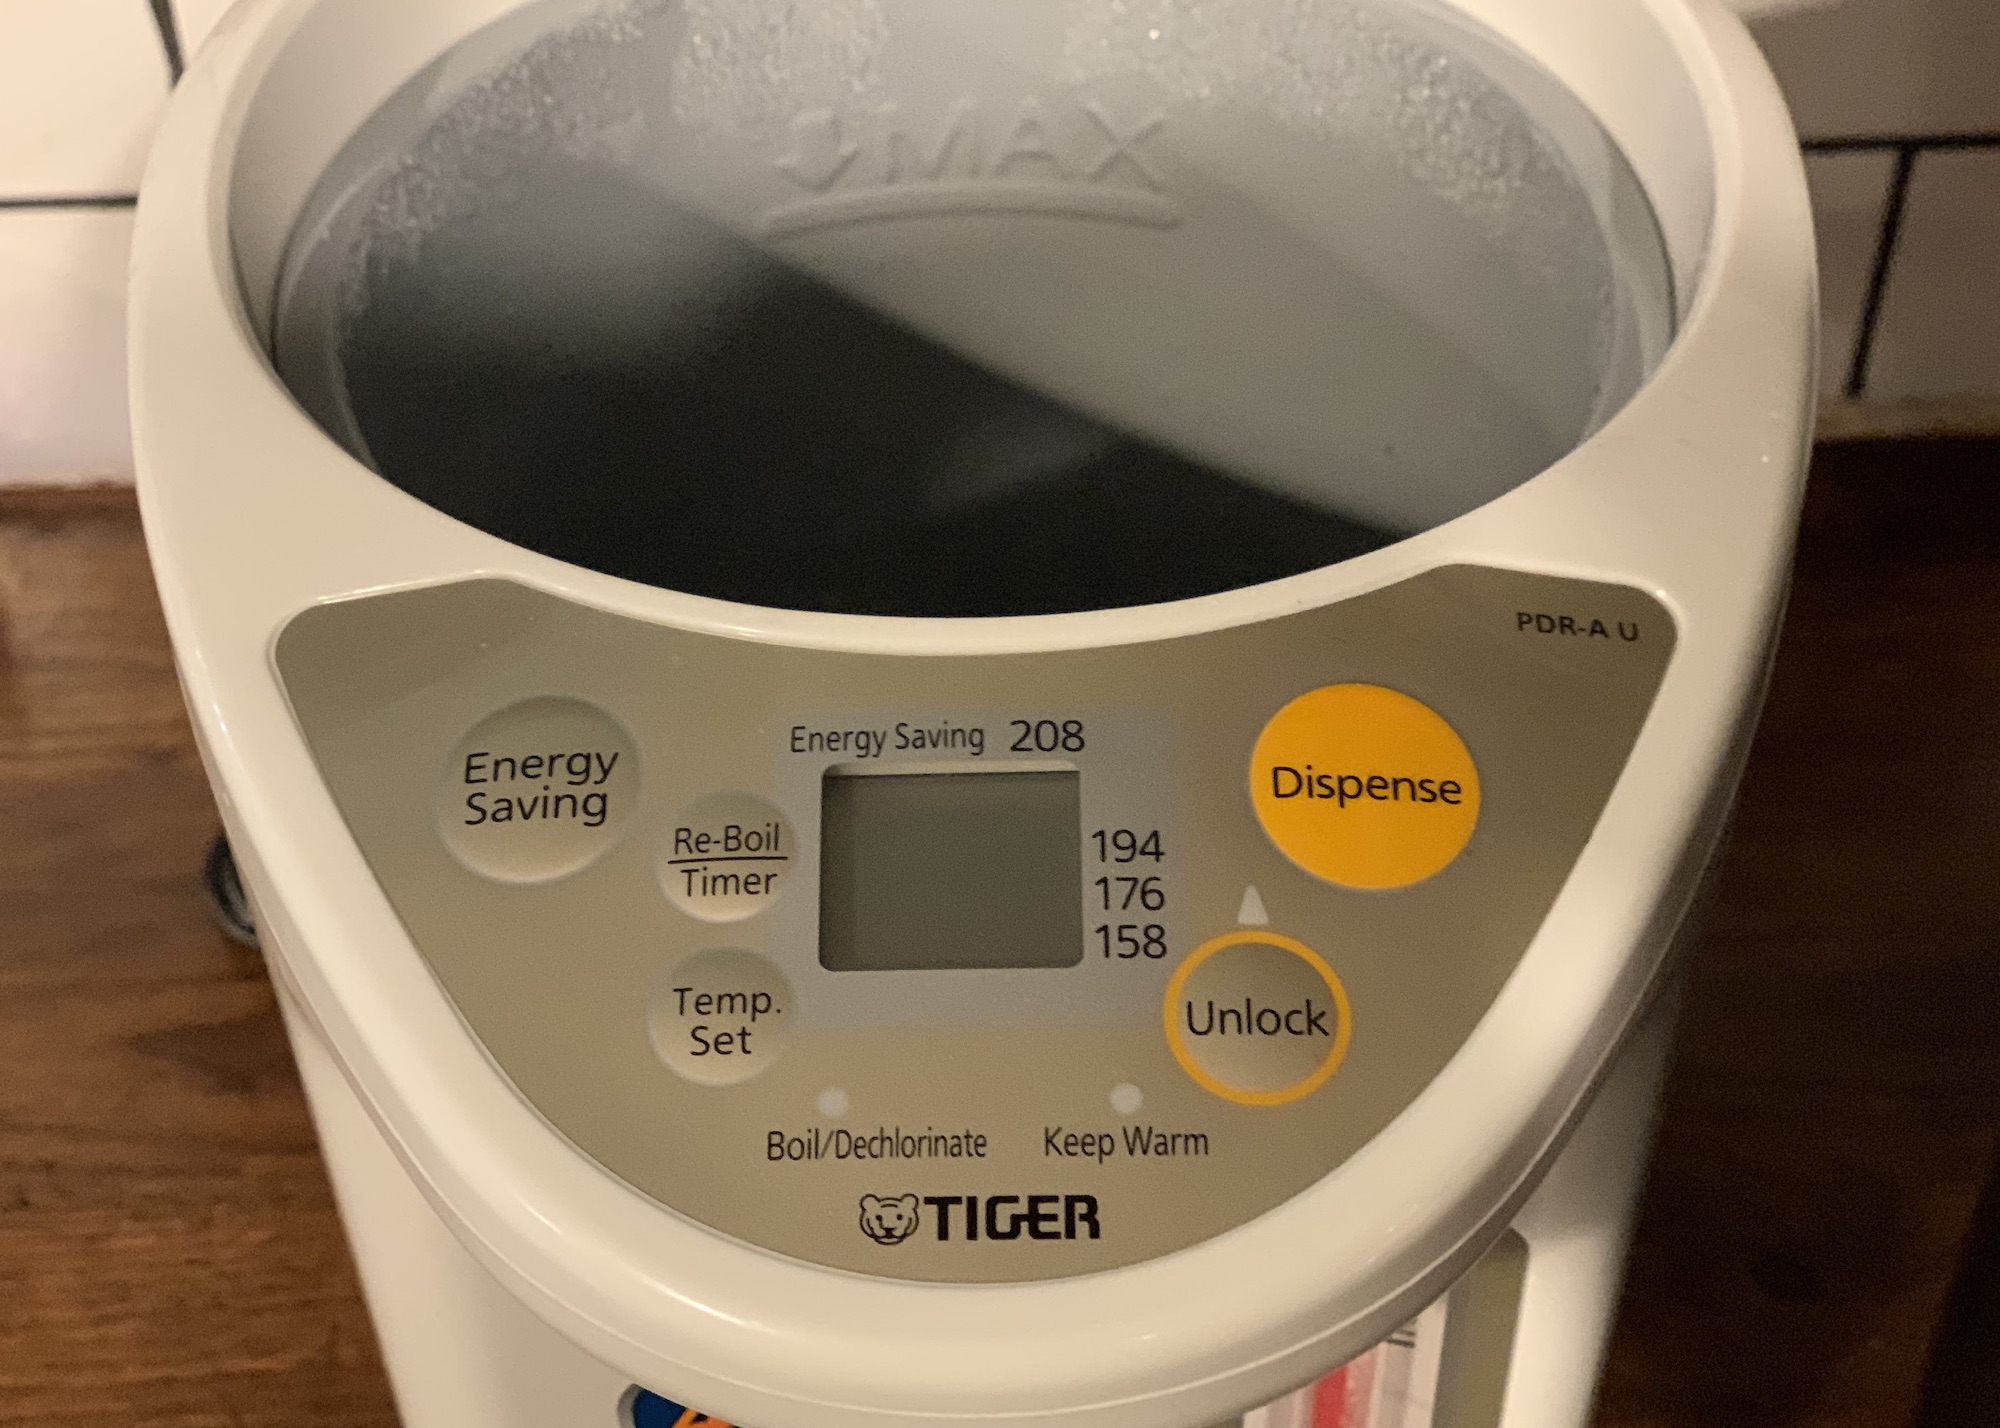 Tiger water boiler and warmer